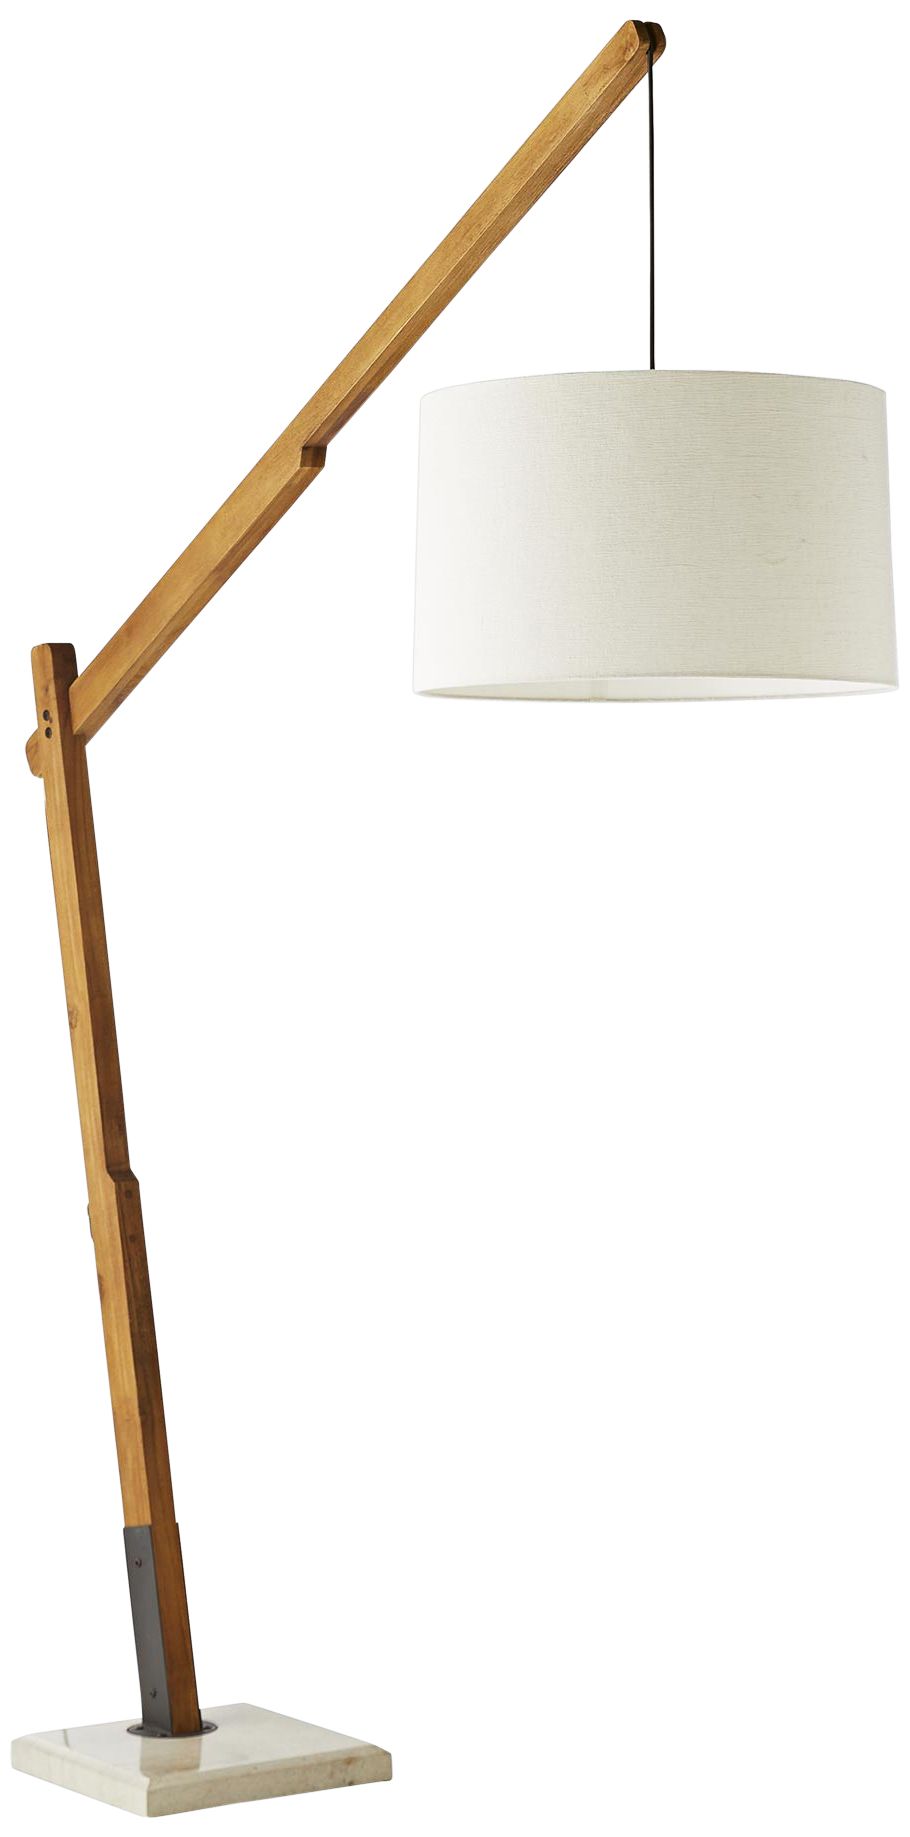 extra tall lamps